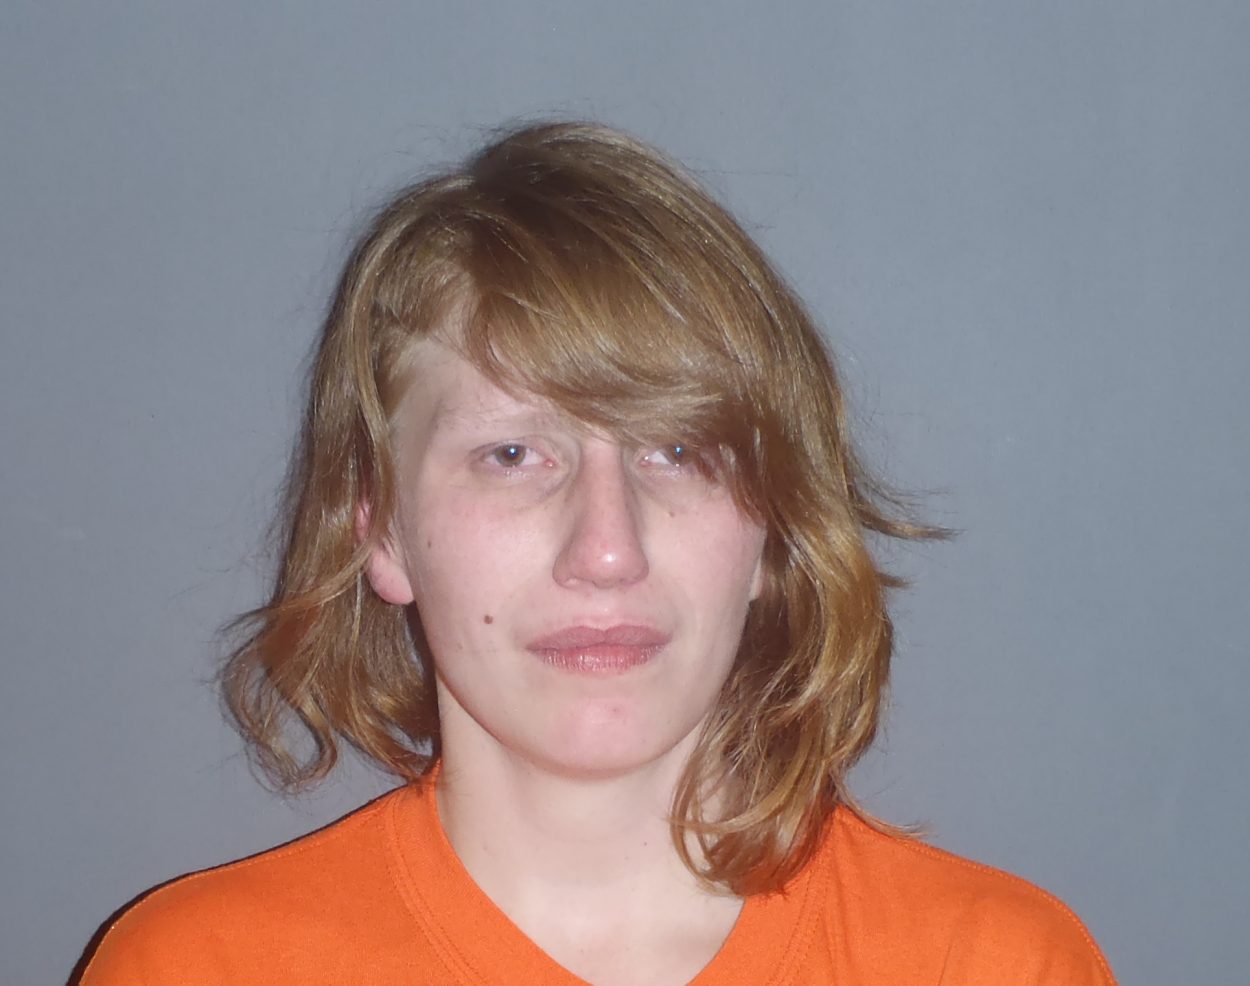 Petersburg woman arrested for burglary